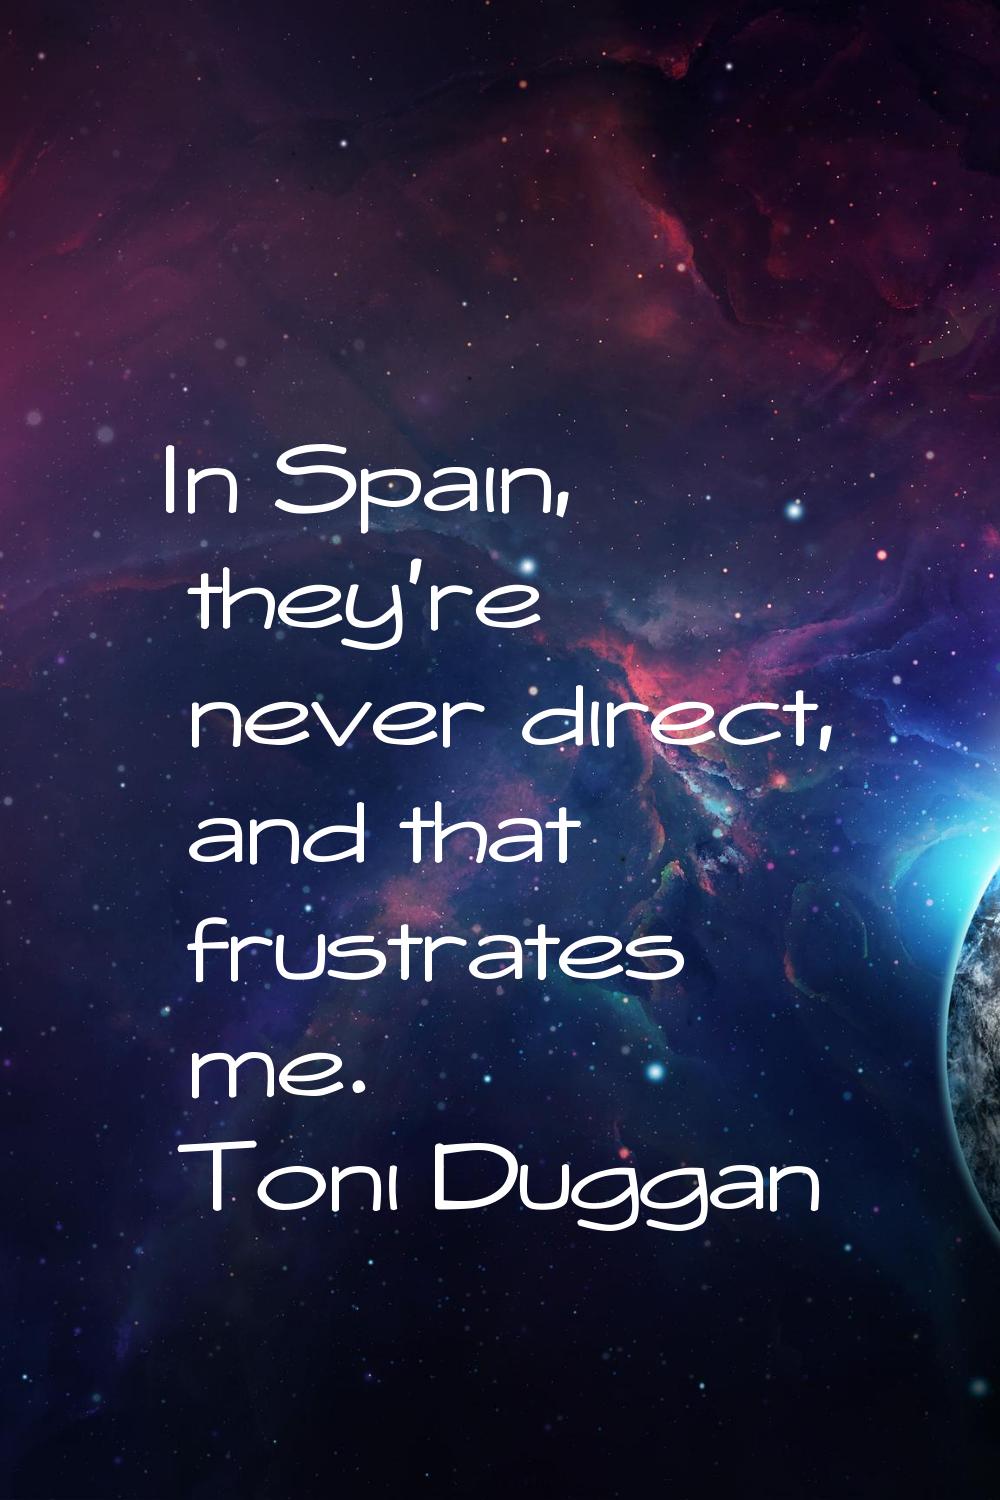 In Spain, they're never direct, and that frustrates me.